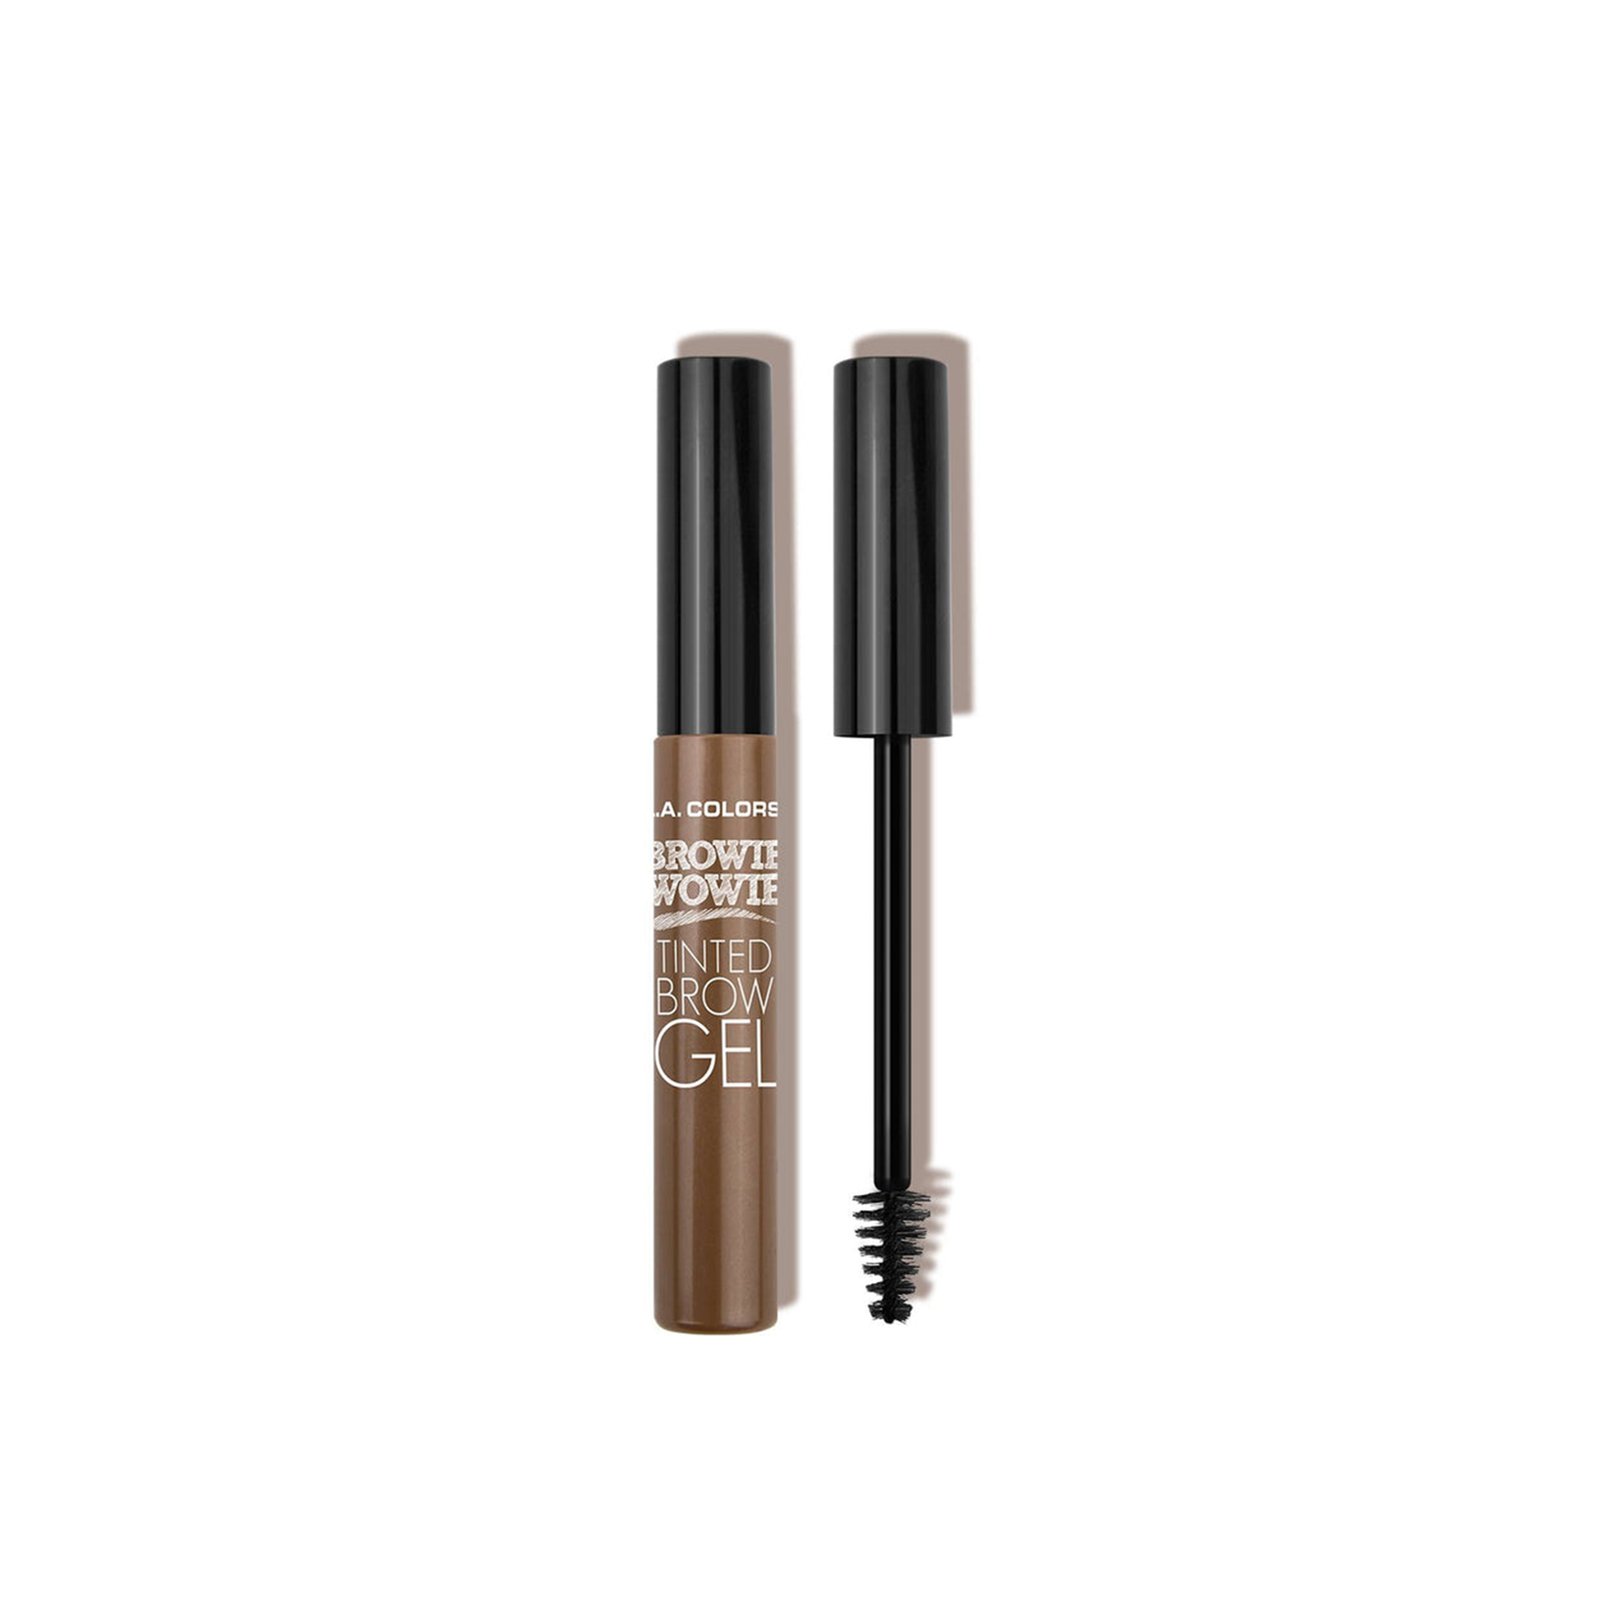 L.A. Colors Browie Wowie Tinted Brow Gel CBG411 Soft Brown 6.5g (0.23 oz)